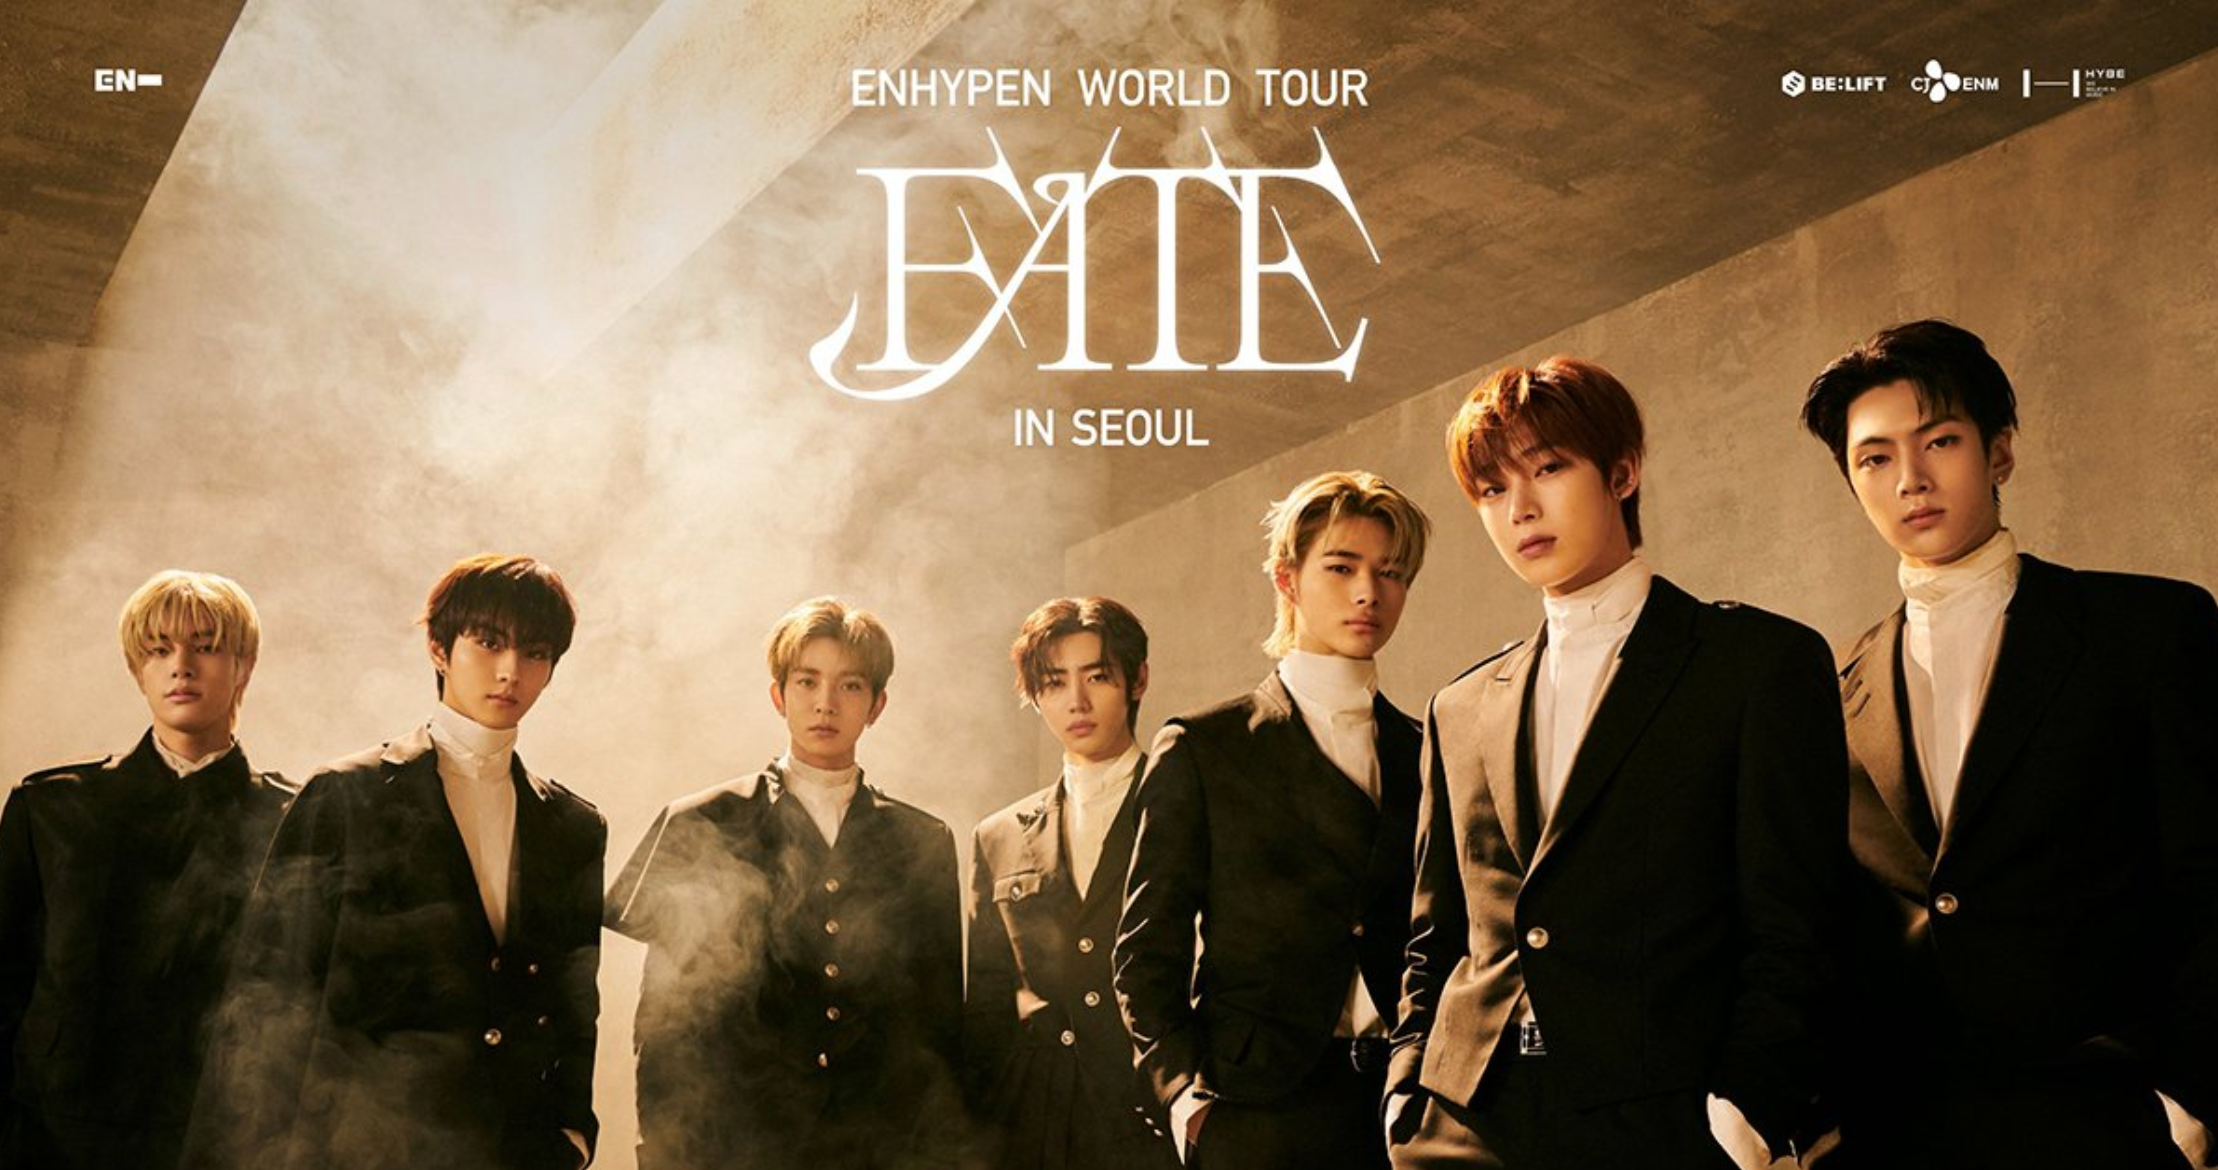 Enhypen World Tour 'FATE in Seoul' Poster